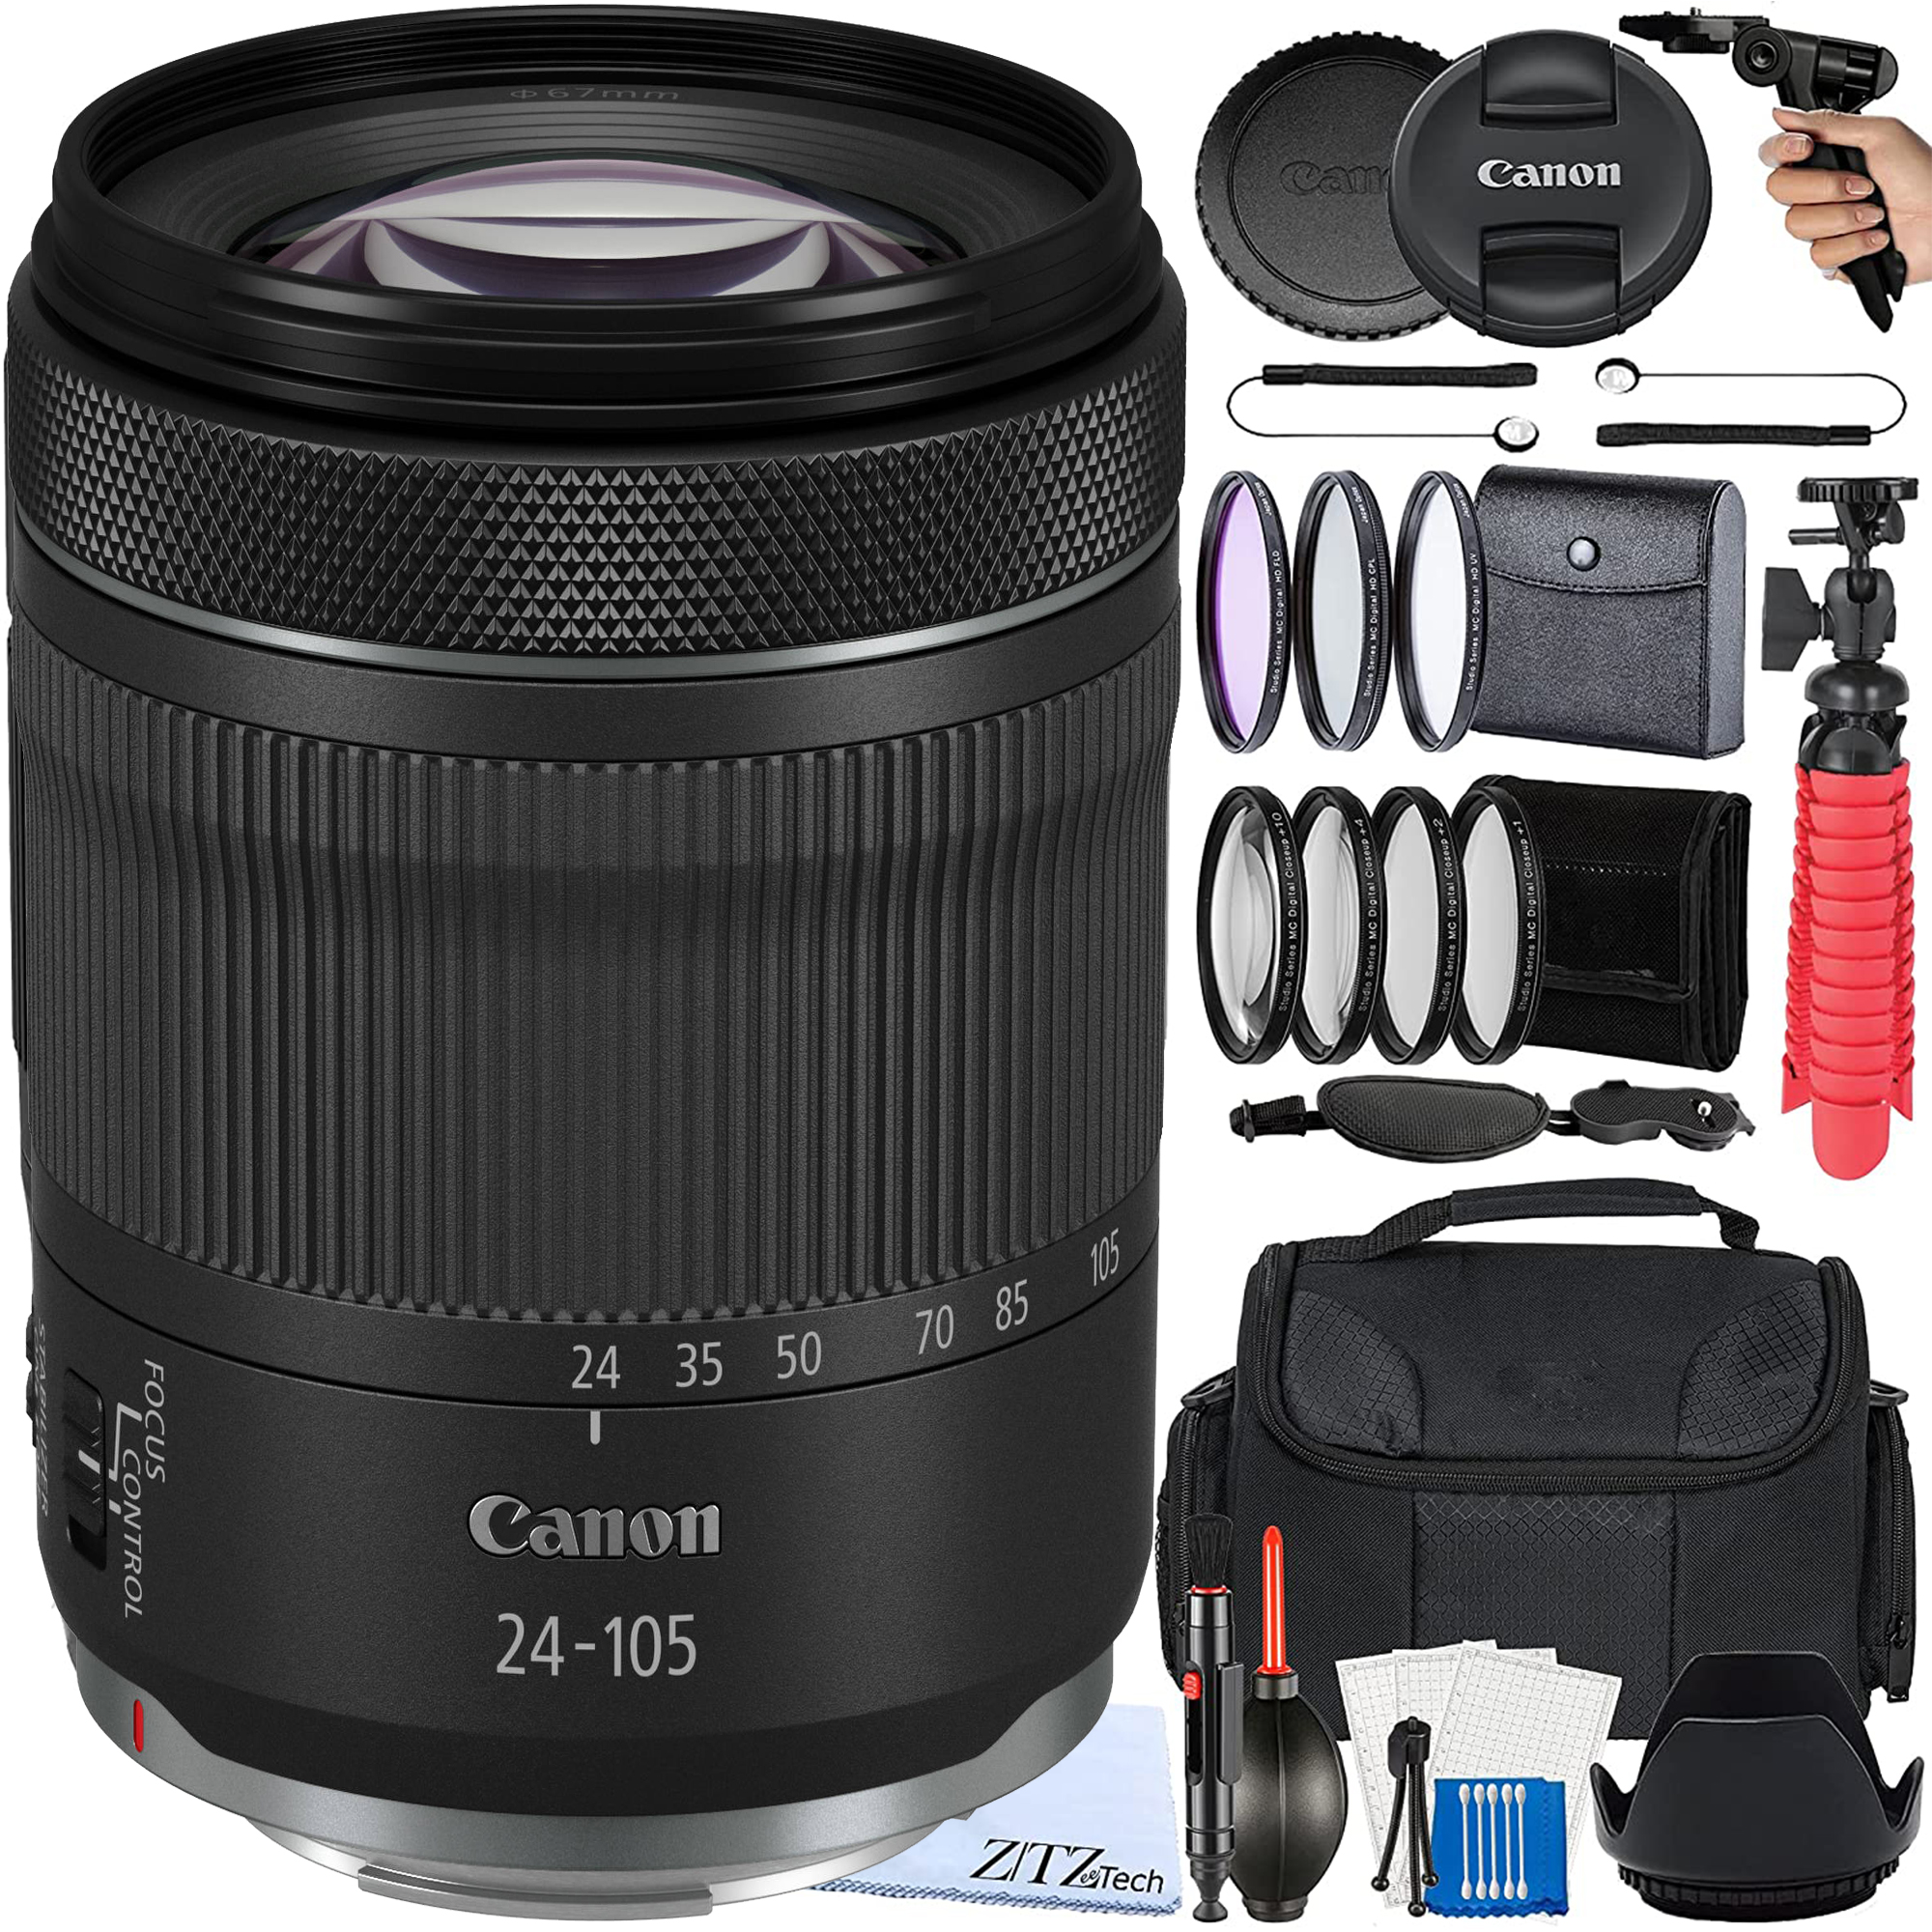 Canon RF 24-105mm f/4-7.1 IS STM Lens + Zeetech Accessory Bundle Package include: Case + Spider Tripod + Pistol Grip + Marco Close Up Kit + Filter (UV, CPL, FLD)